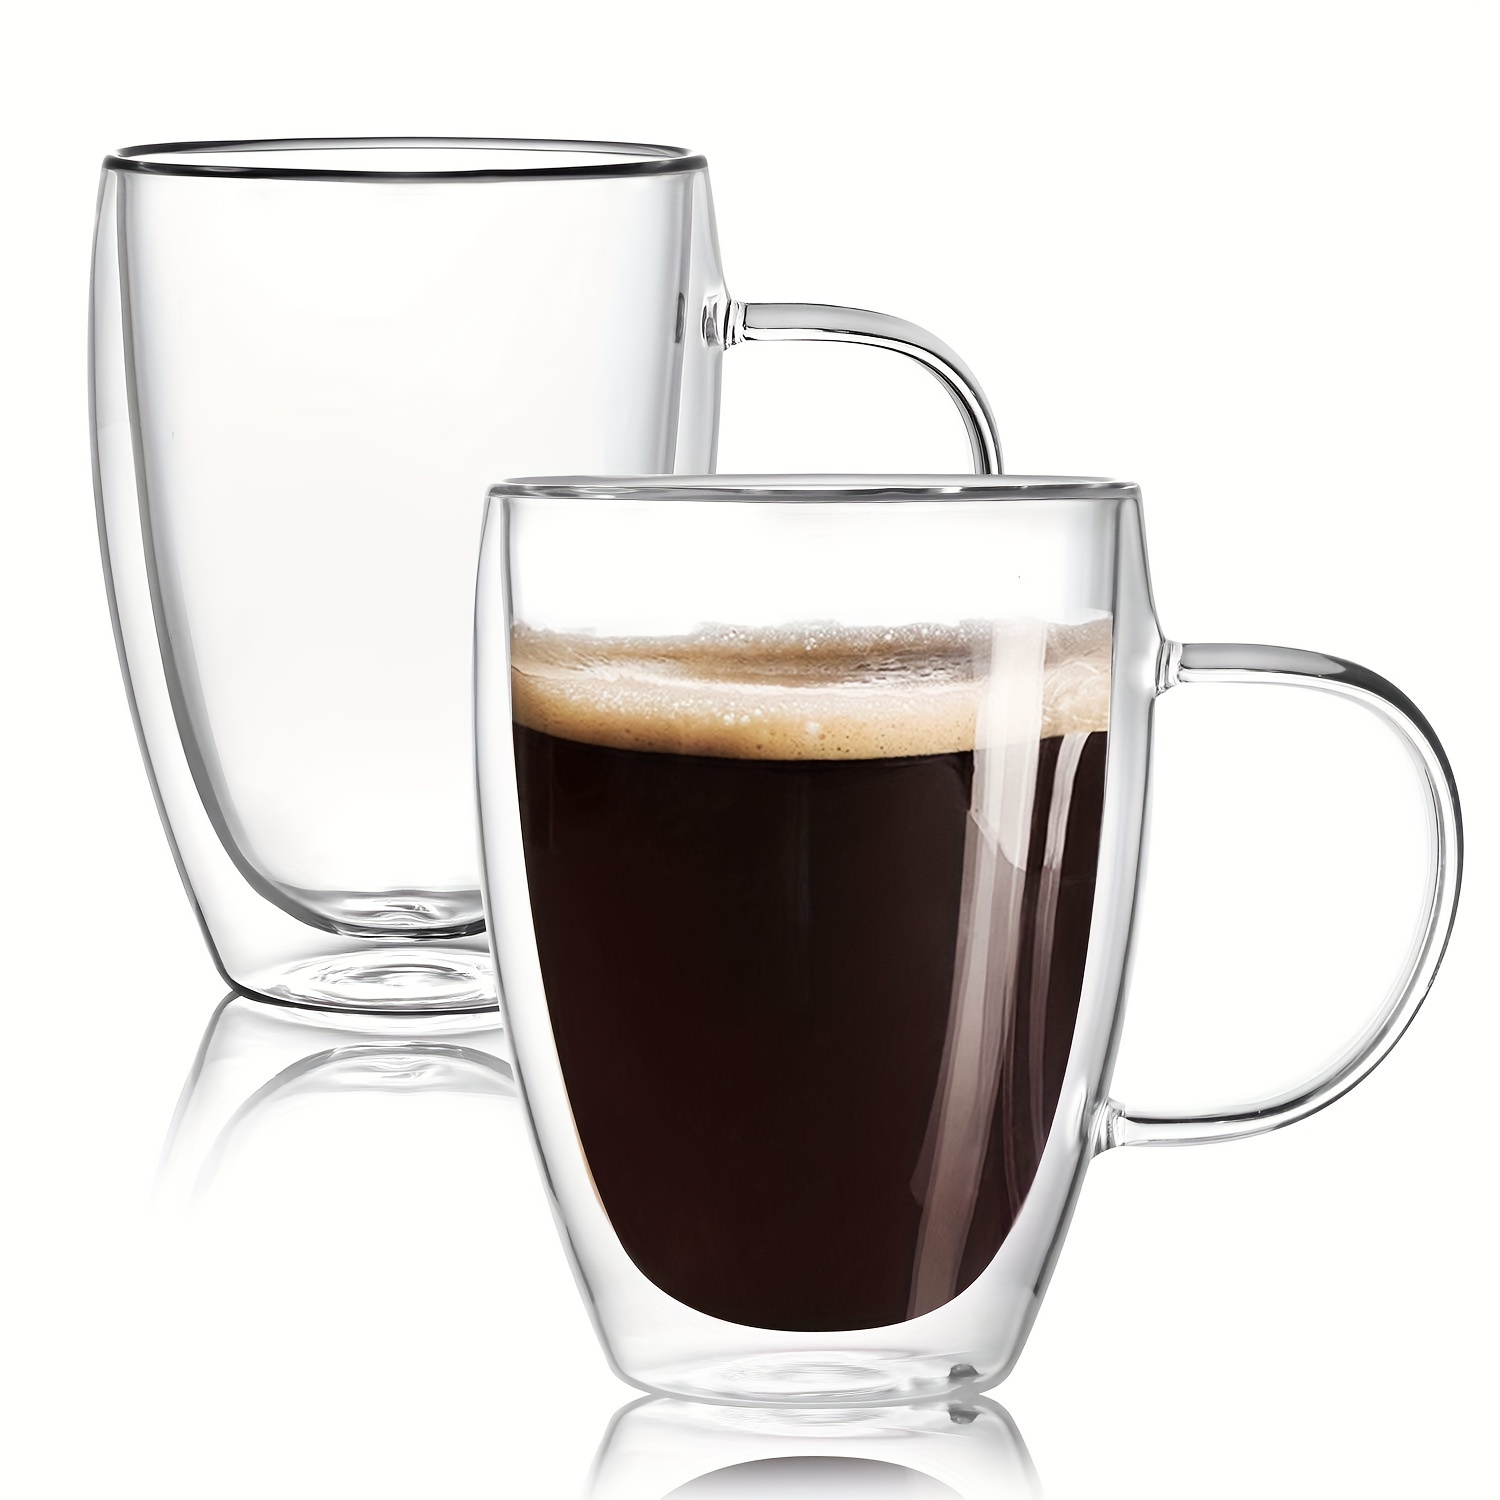 6.8 oz Double Wall Insulated Glasses Espresso Cups with Handle Clear Glass  Coffee Mug Set for Cappuccino Tea Latte Beverage, Glasses Heat Resistant  Dishwasher Microwave Safe 